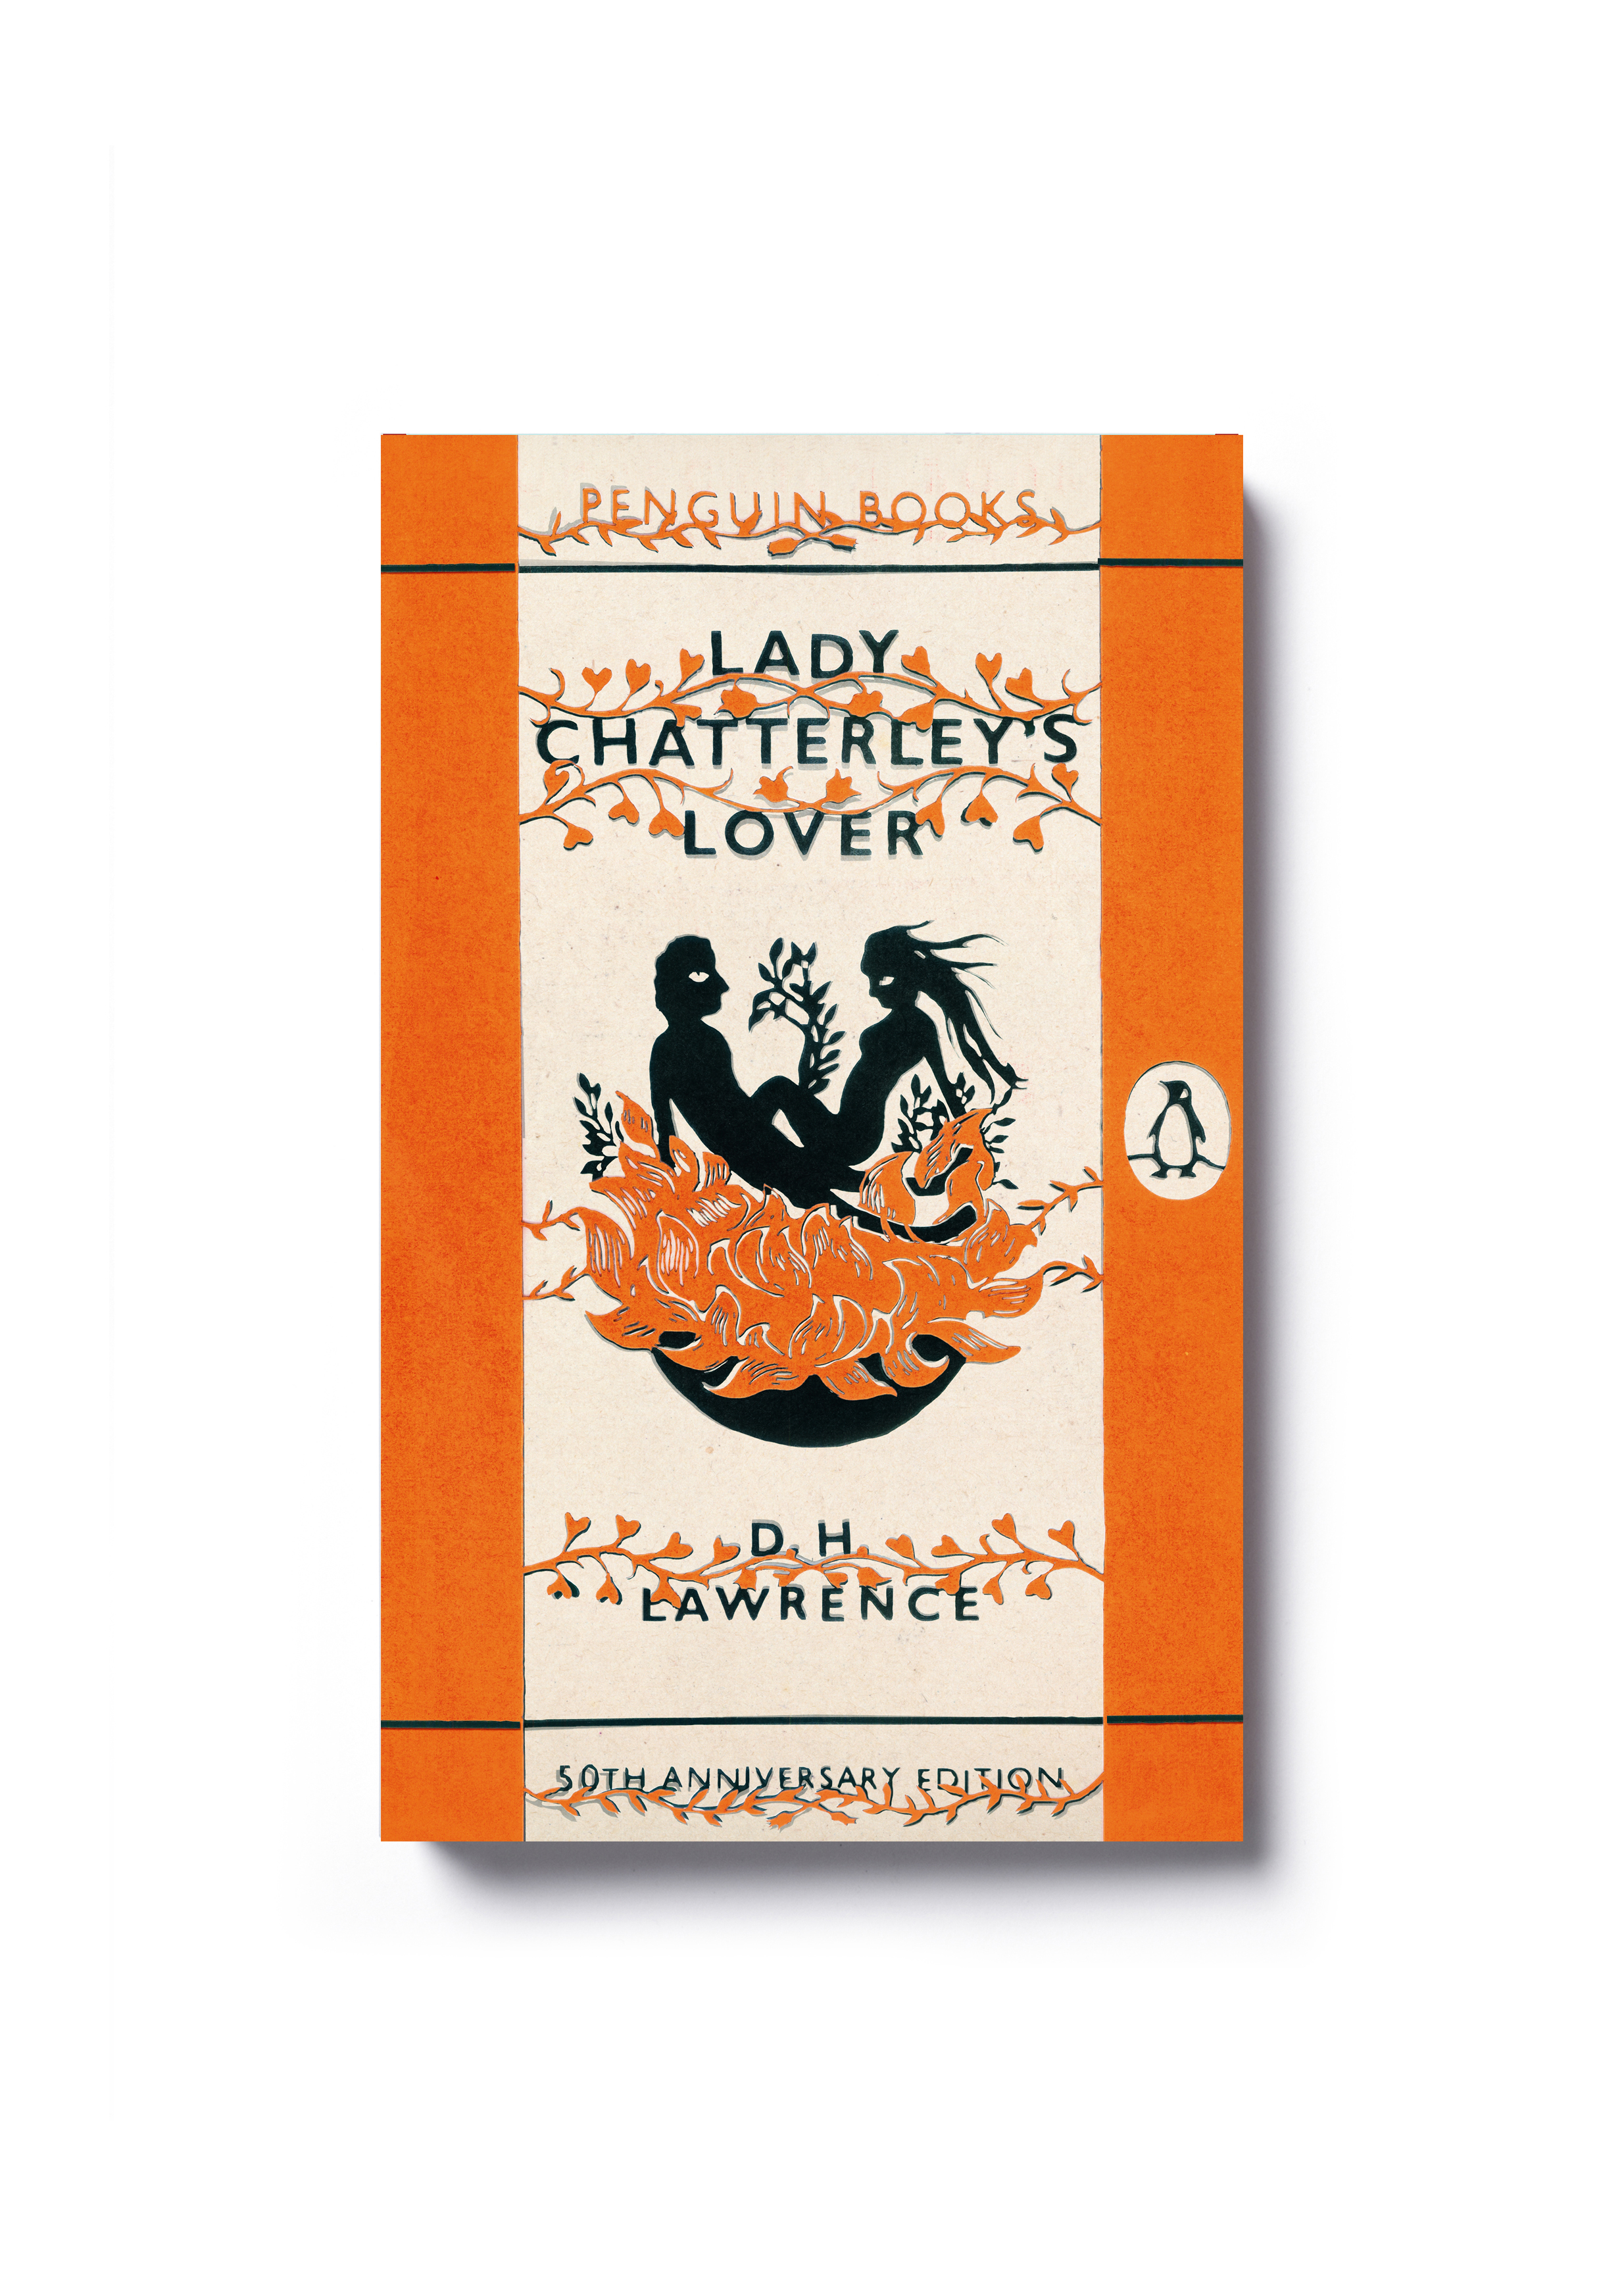  Lady Chatterley's Lover by D. H. Lawrence (60th Anniversary Edition) -&nbsp; Design by Jim Stoddart  